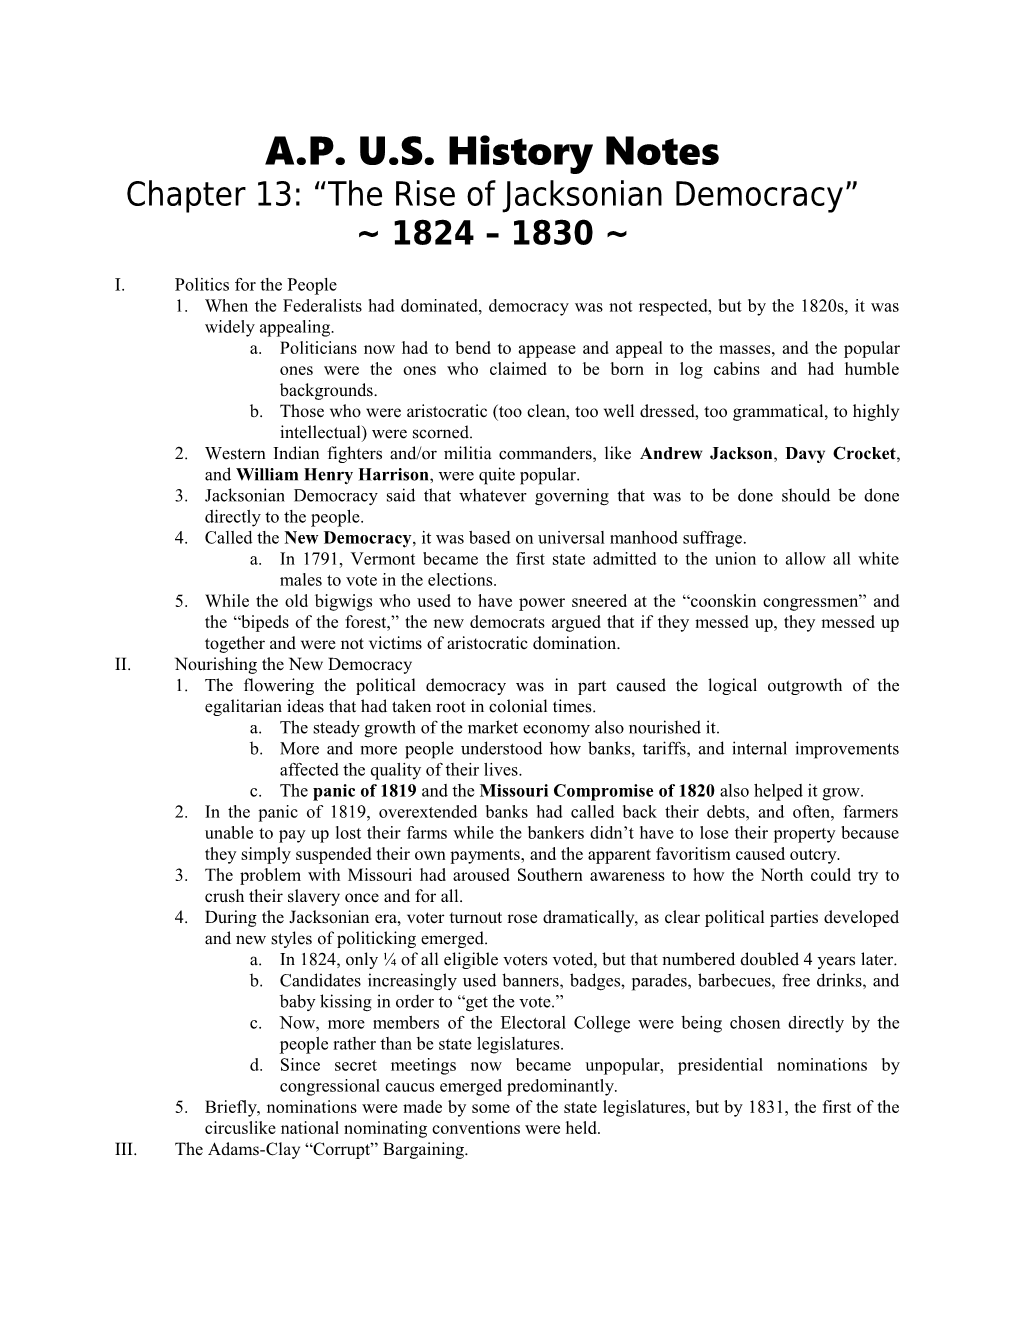 Chapter 13: the Rise of Jacksonian Democracy